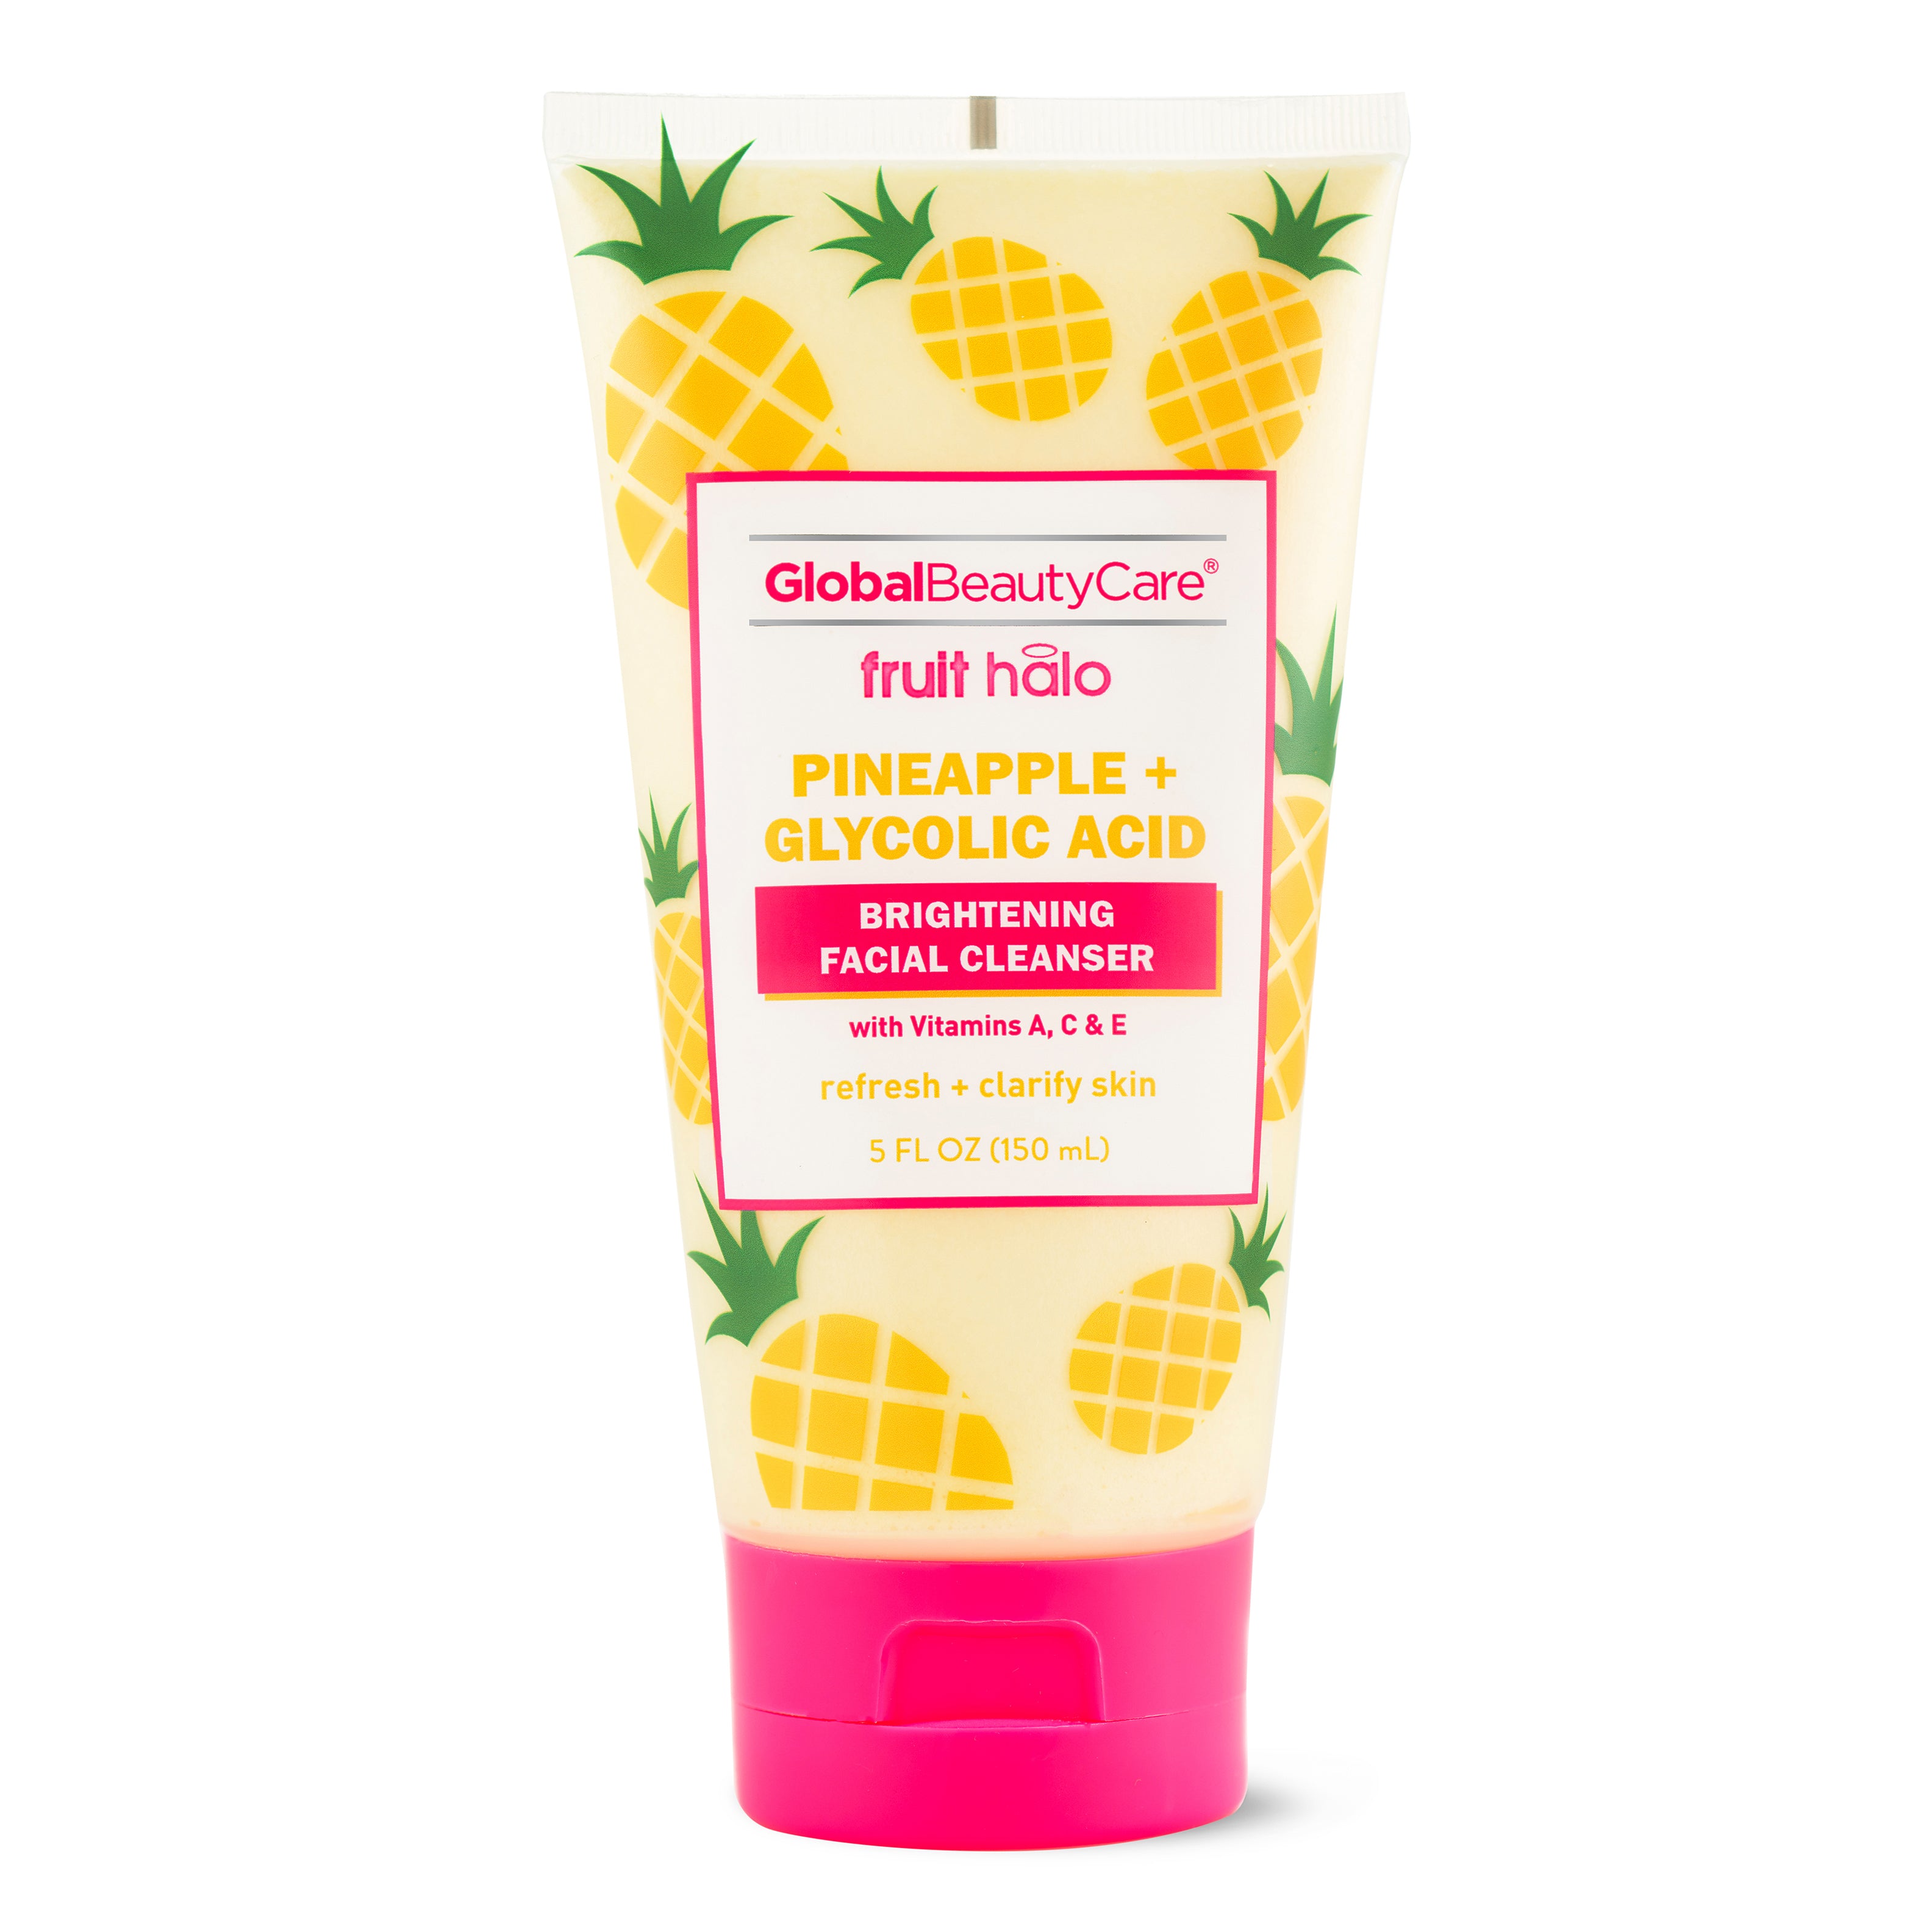 Pineapple + Glycolic Acid Brightening Facial Cleanser